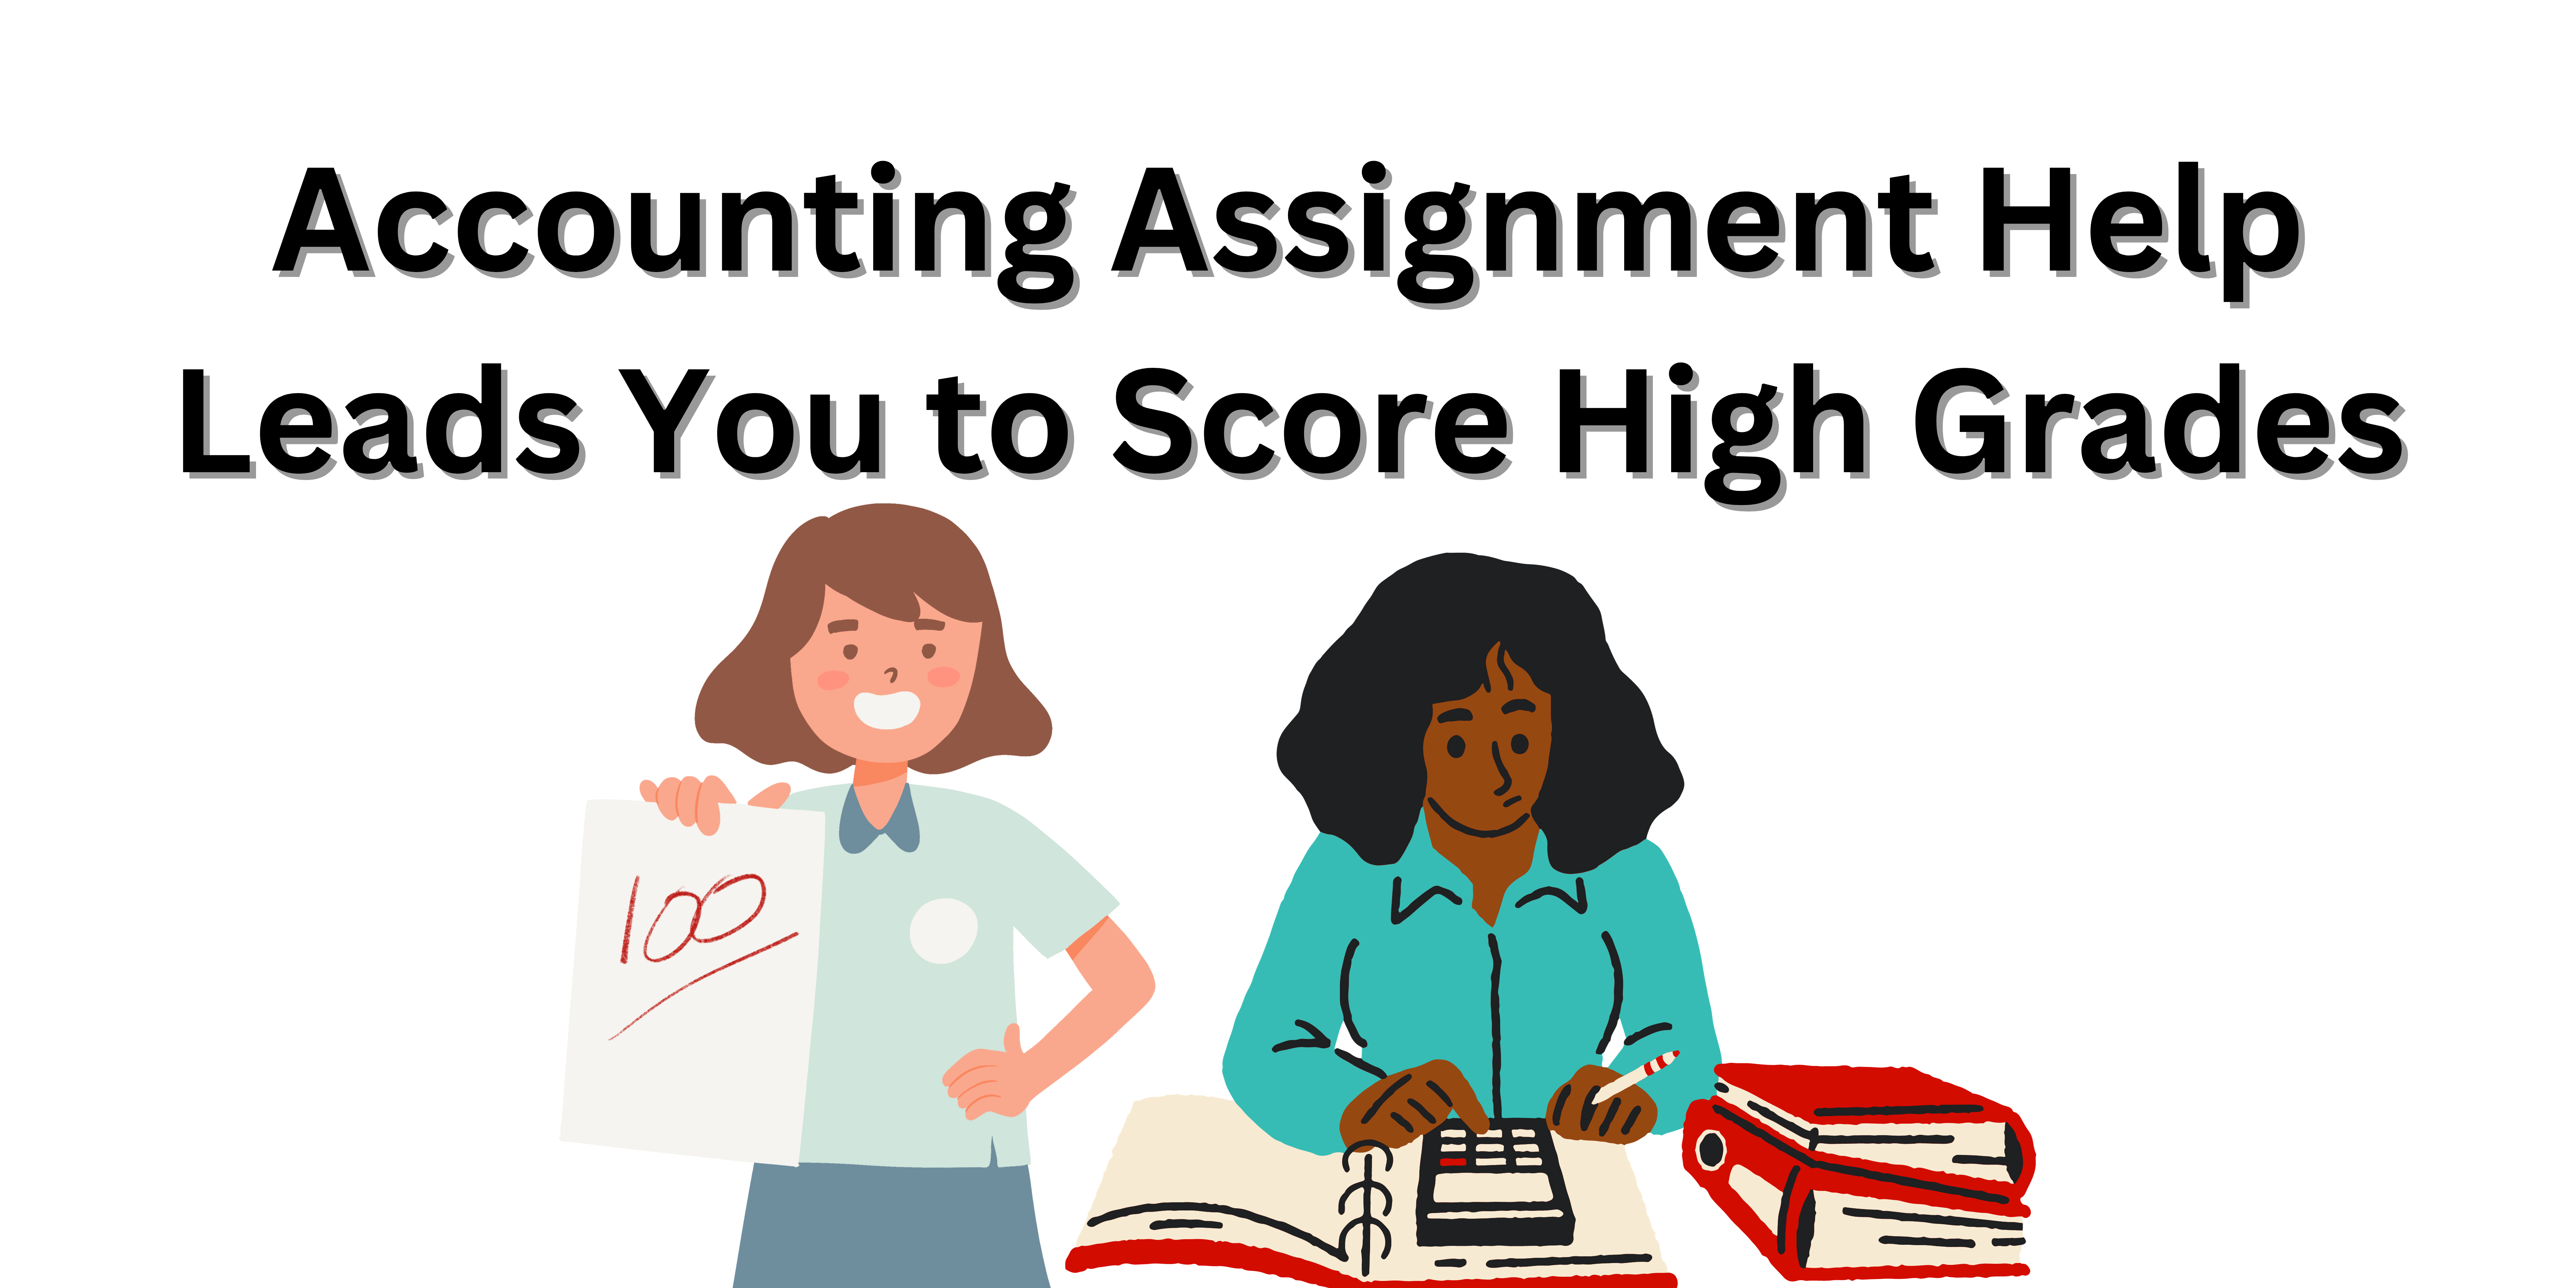 Accounting Assignment Help Leads You to Score High Grades